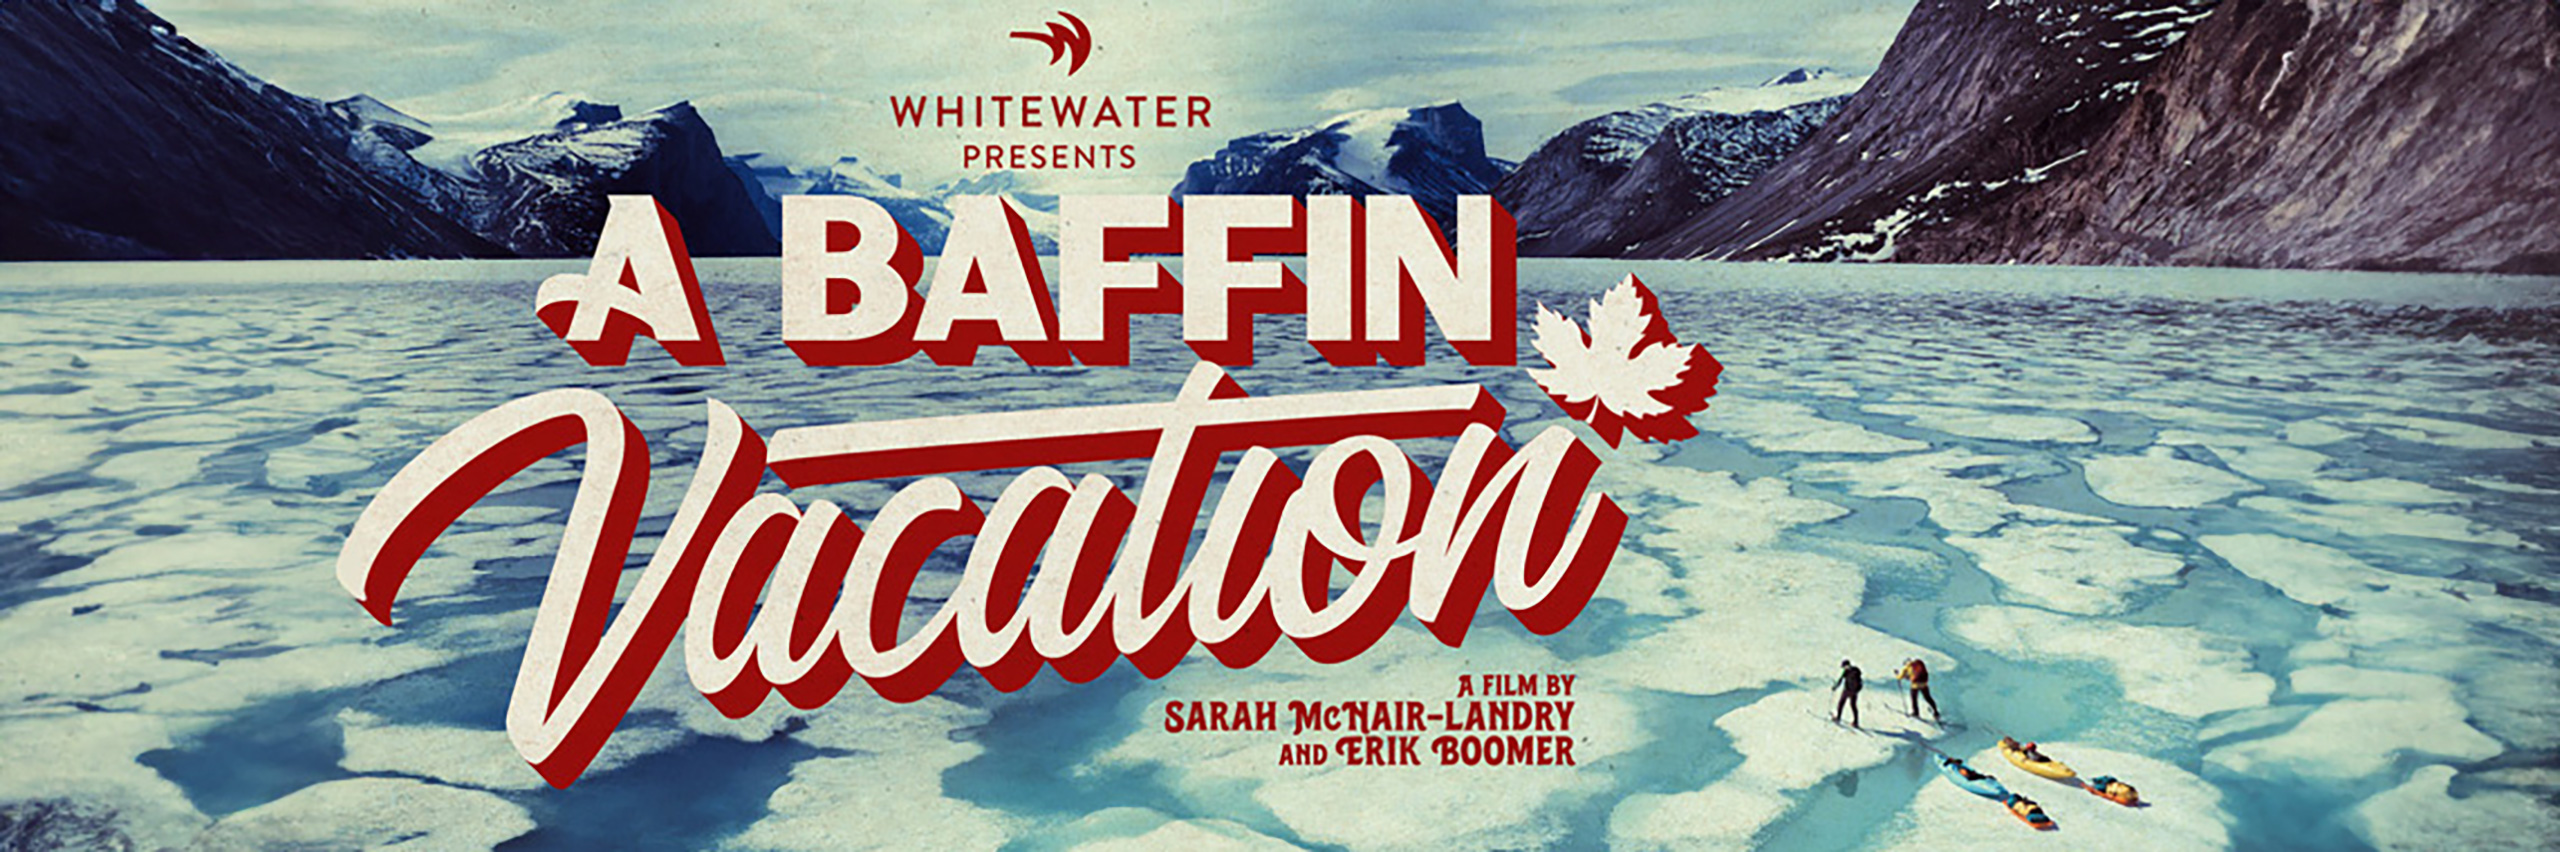 A Baffin Vacation